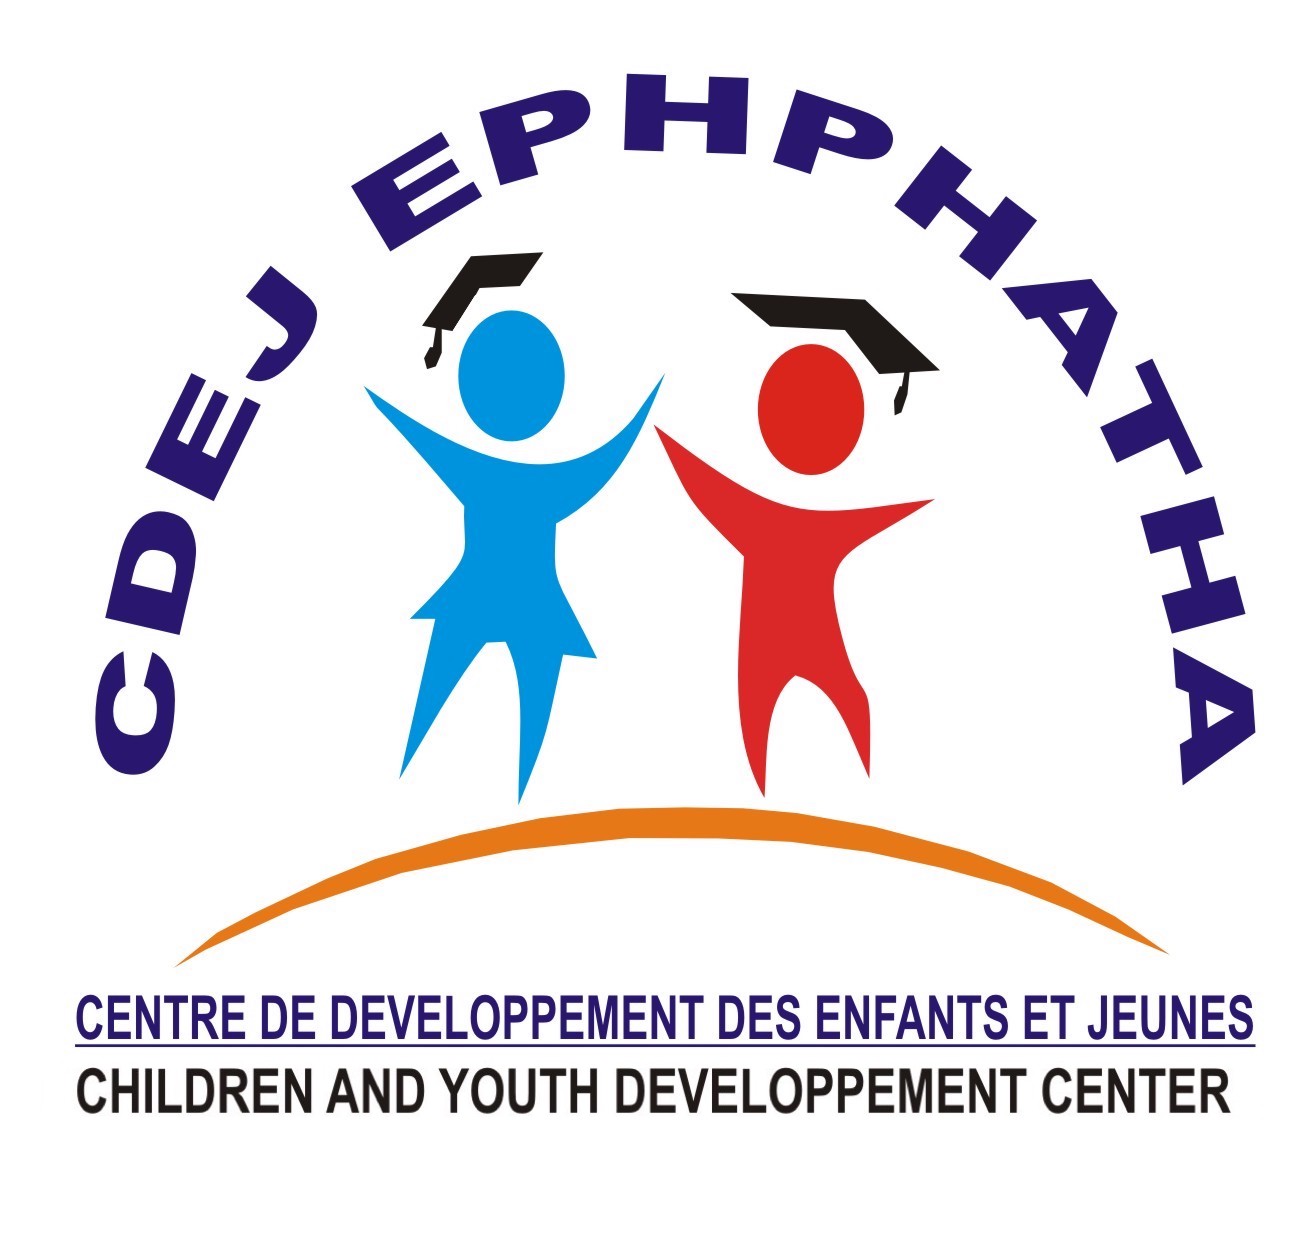 Childreen and Youth Development Center (CDEJ)